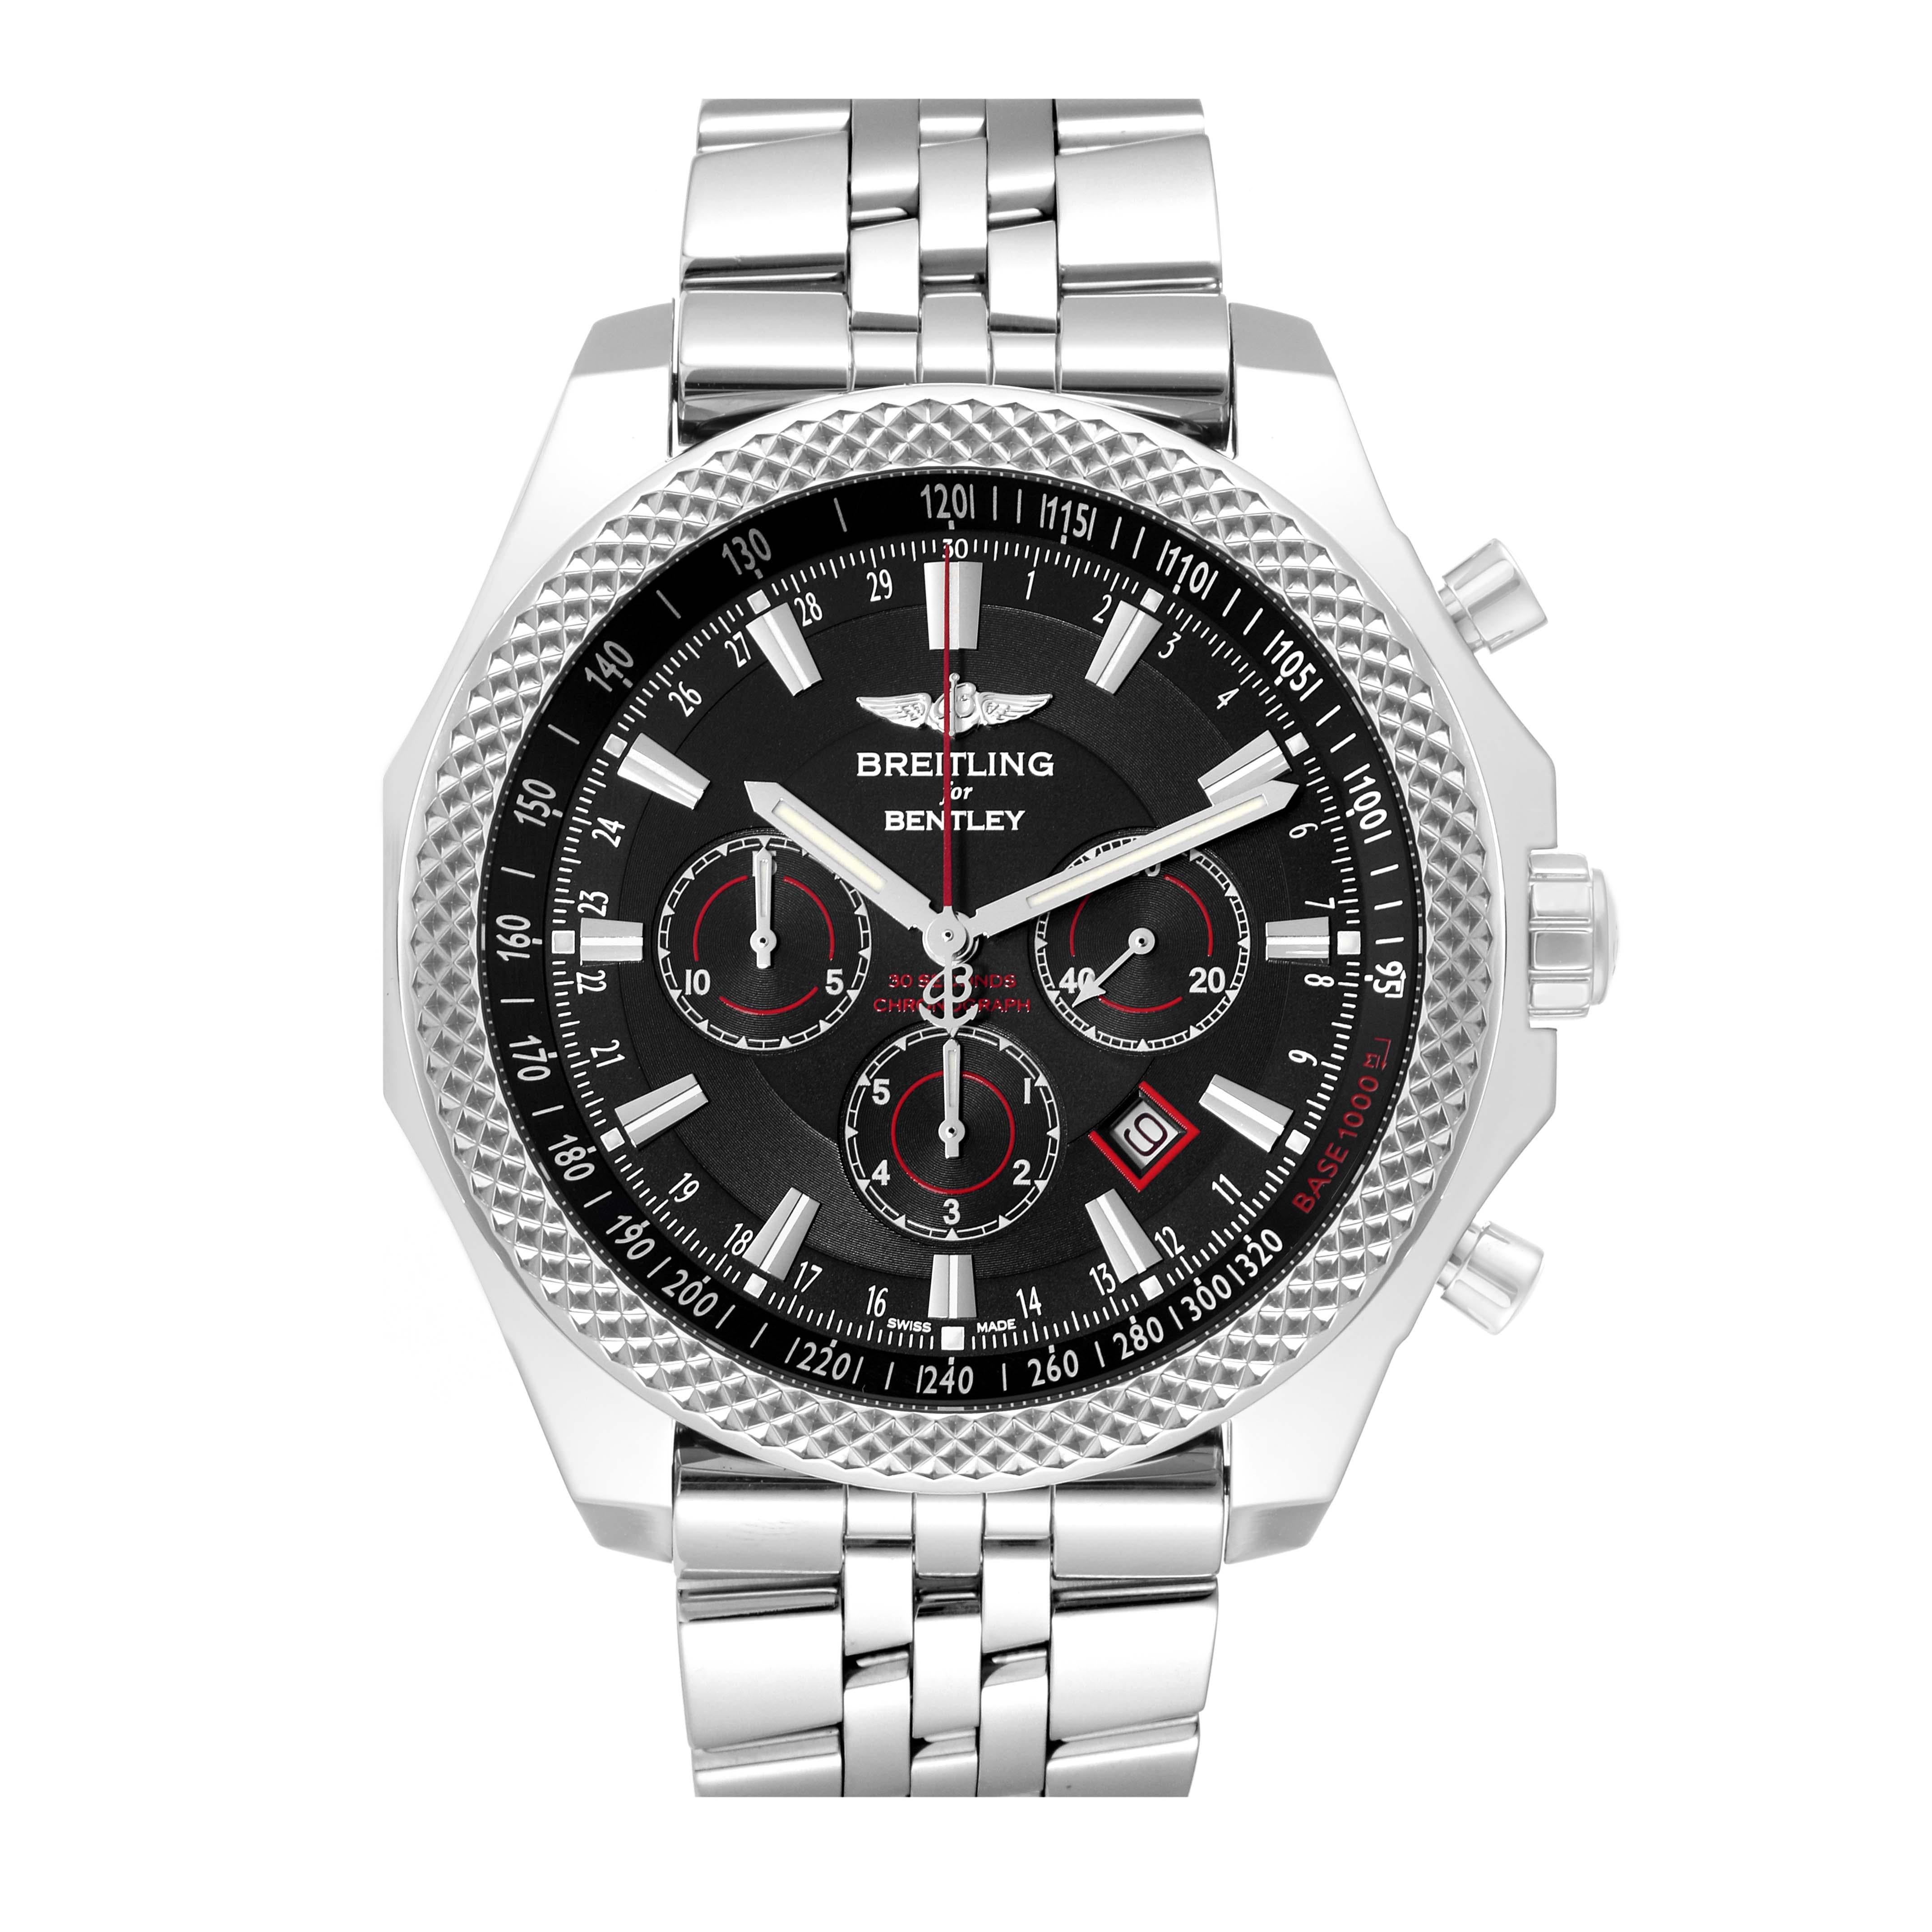 Breitling Bentley Barnato 49mm Steel Mens Watch A25368 Box Papers. Automatic self-winding officially certified chronometer movement. Chronograph function. Stainless steel case 49.0 mm in diameter. Stainless steel pushers and screwed-down crown.